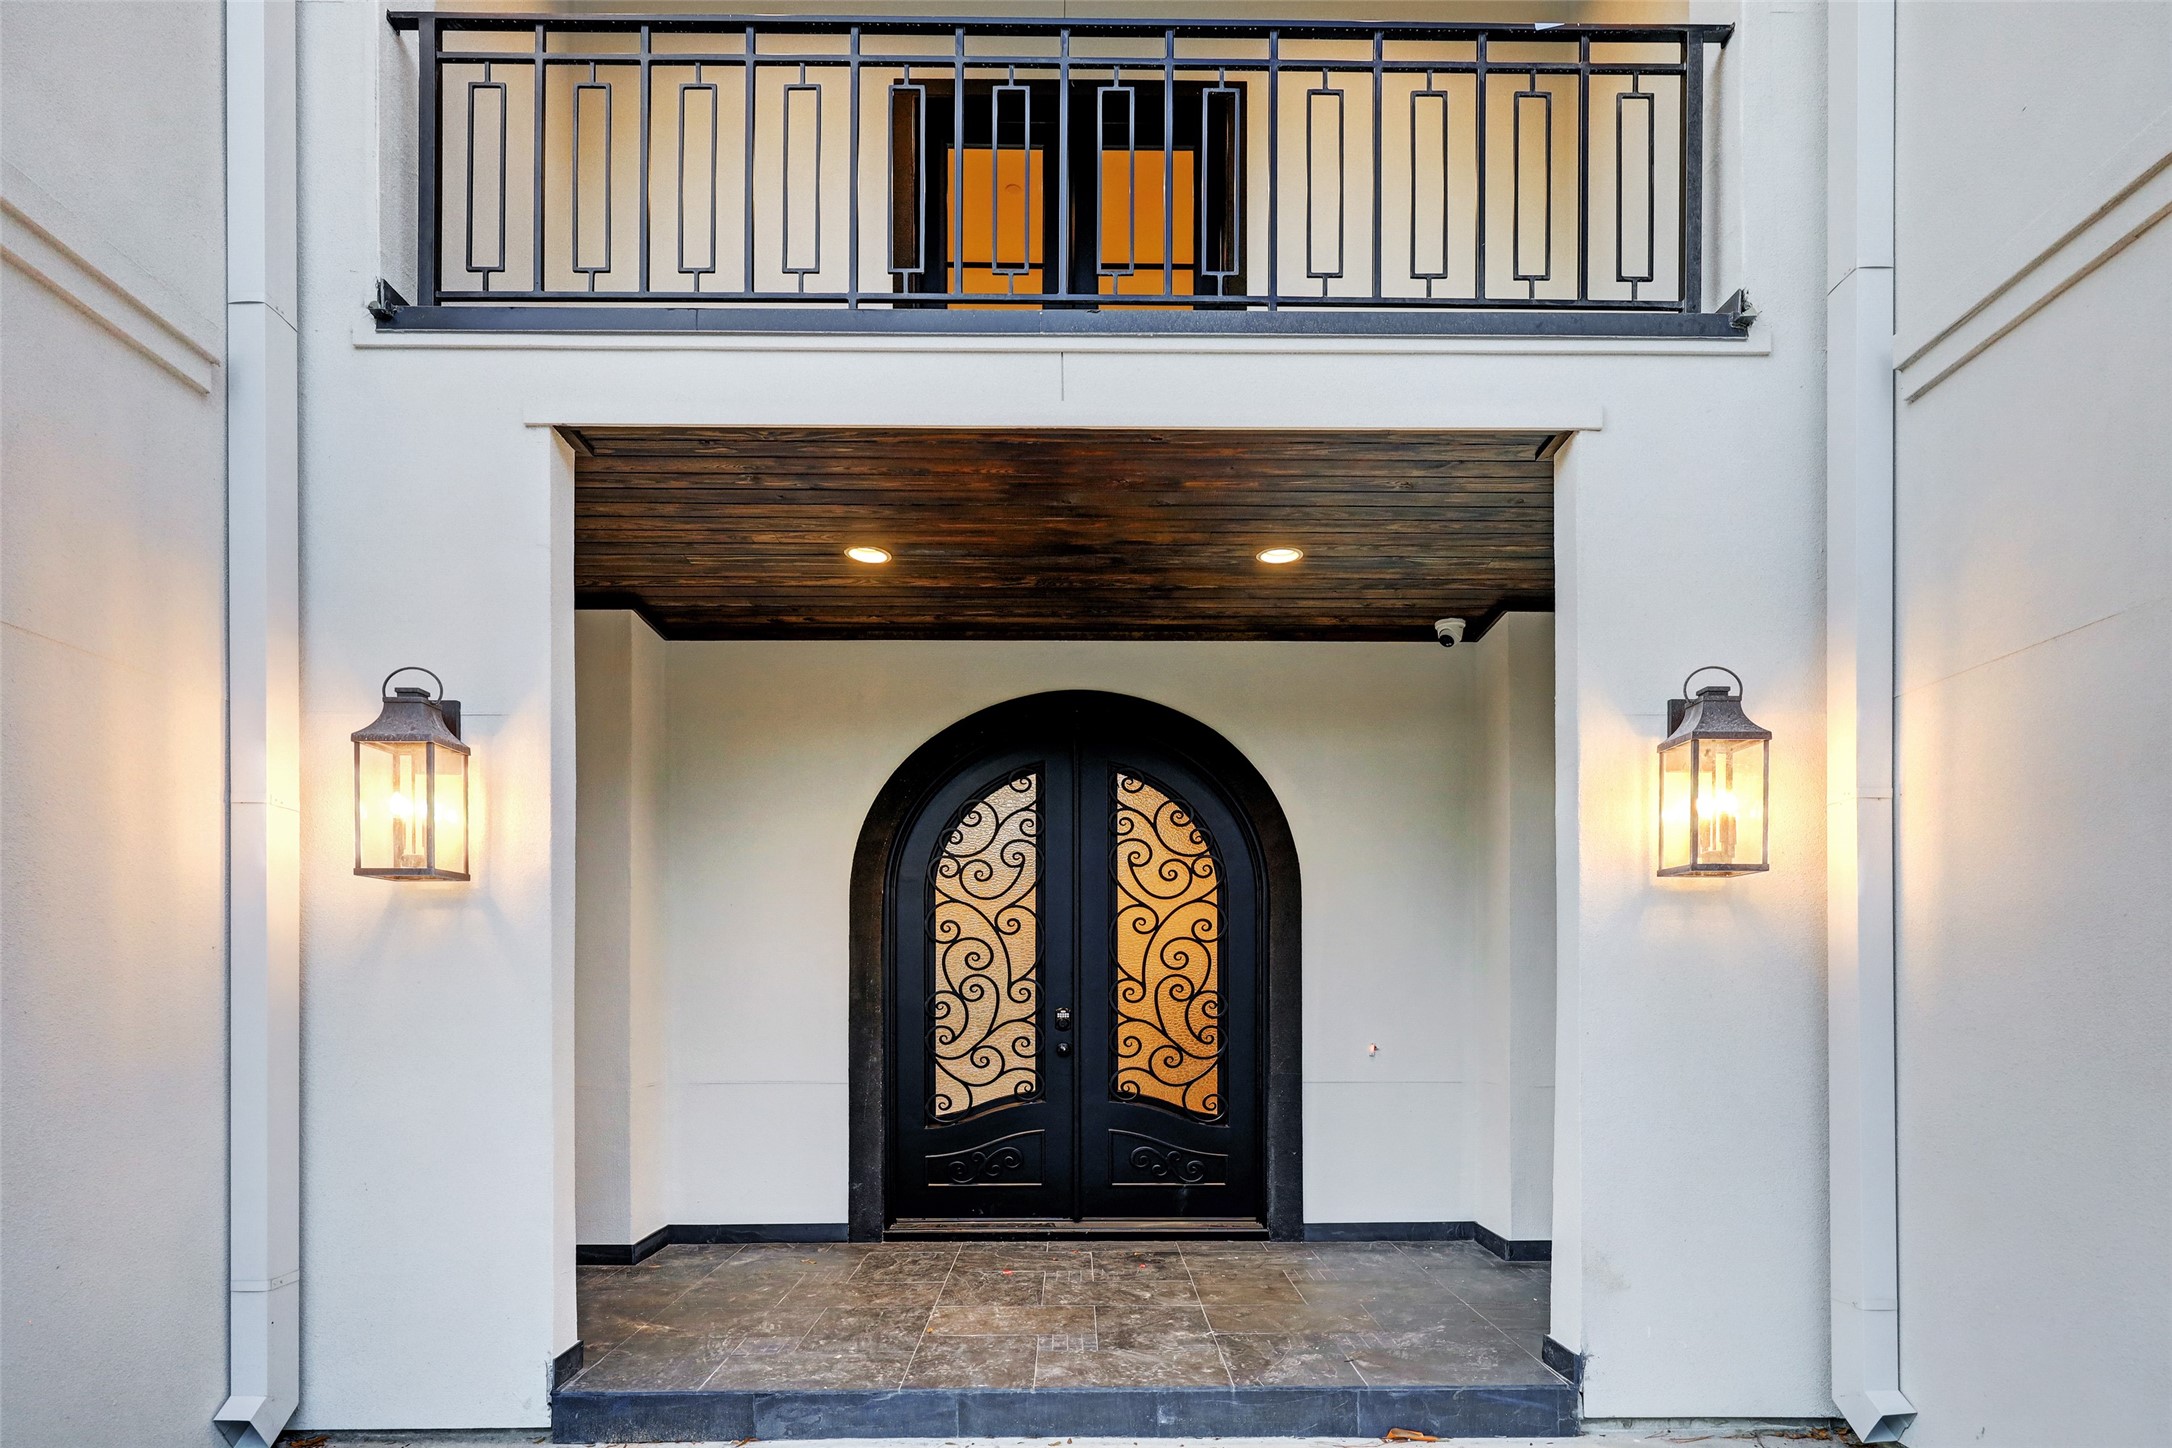 Vestibule entry with double doors and slate tiled floors, wood paneled ceiling, recessed and lantern lighting.